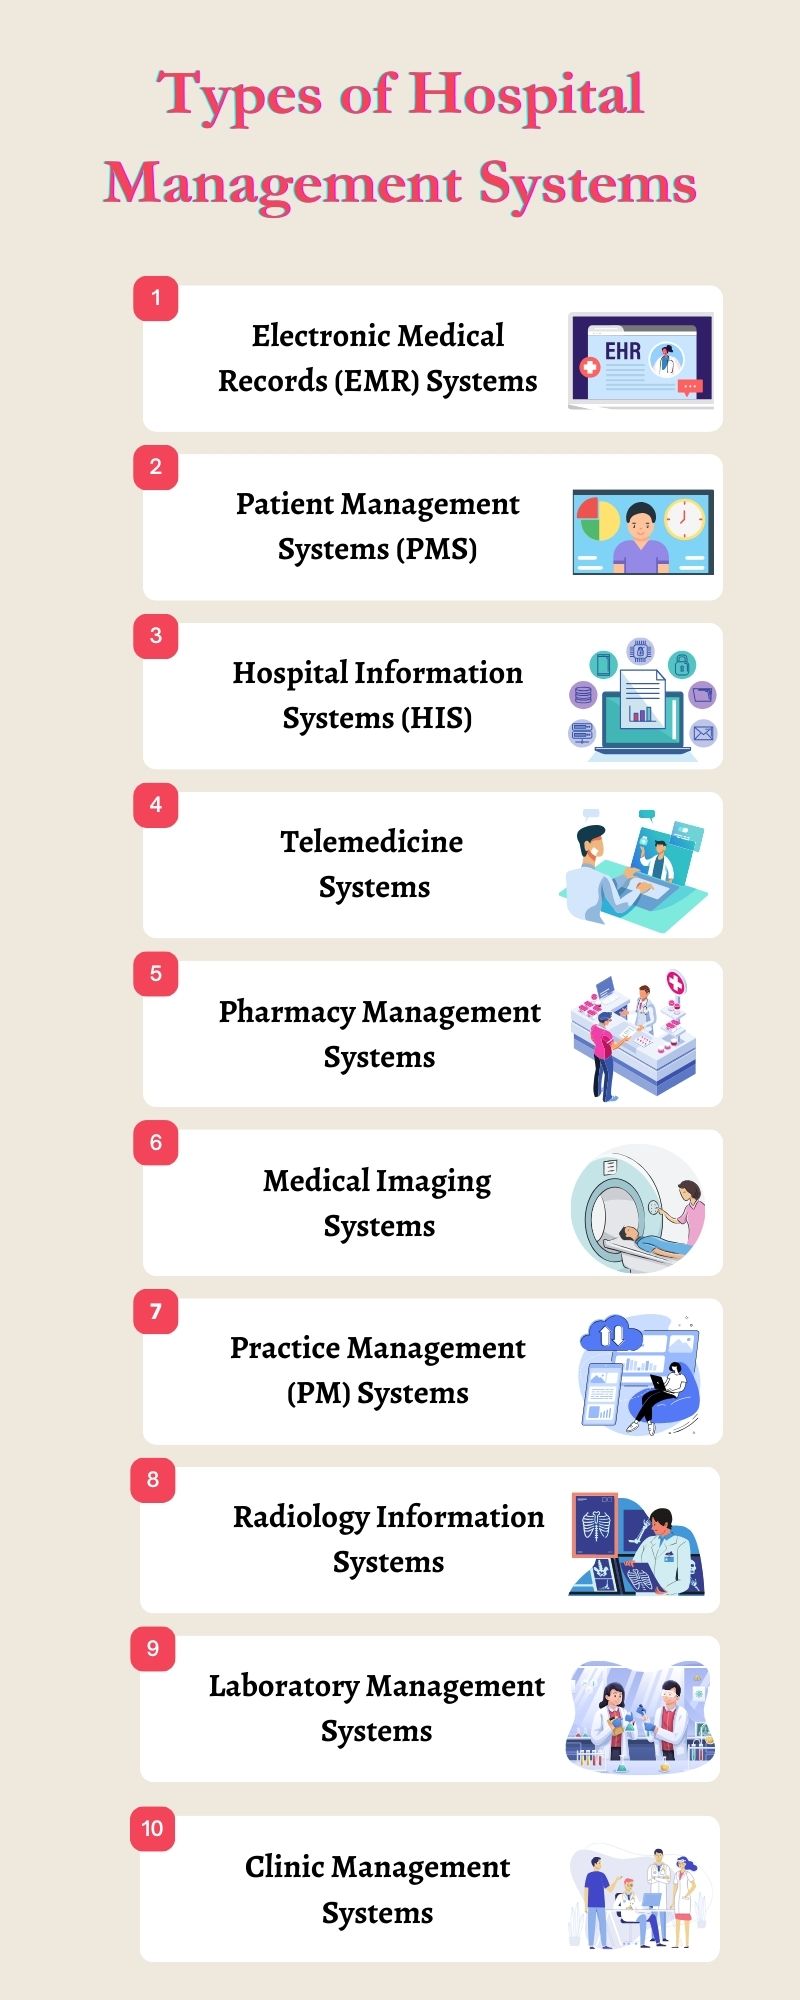 Types of Hospital Management Systems